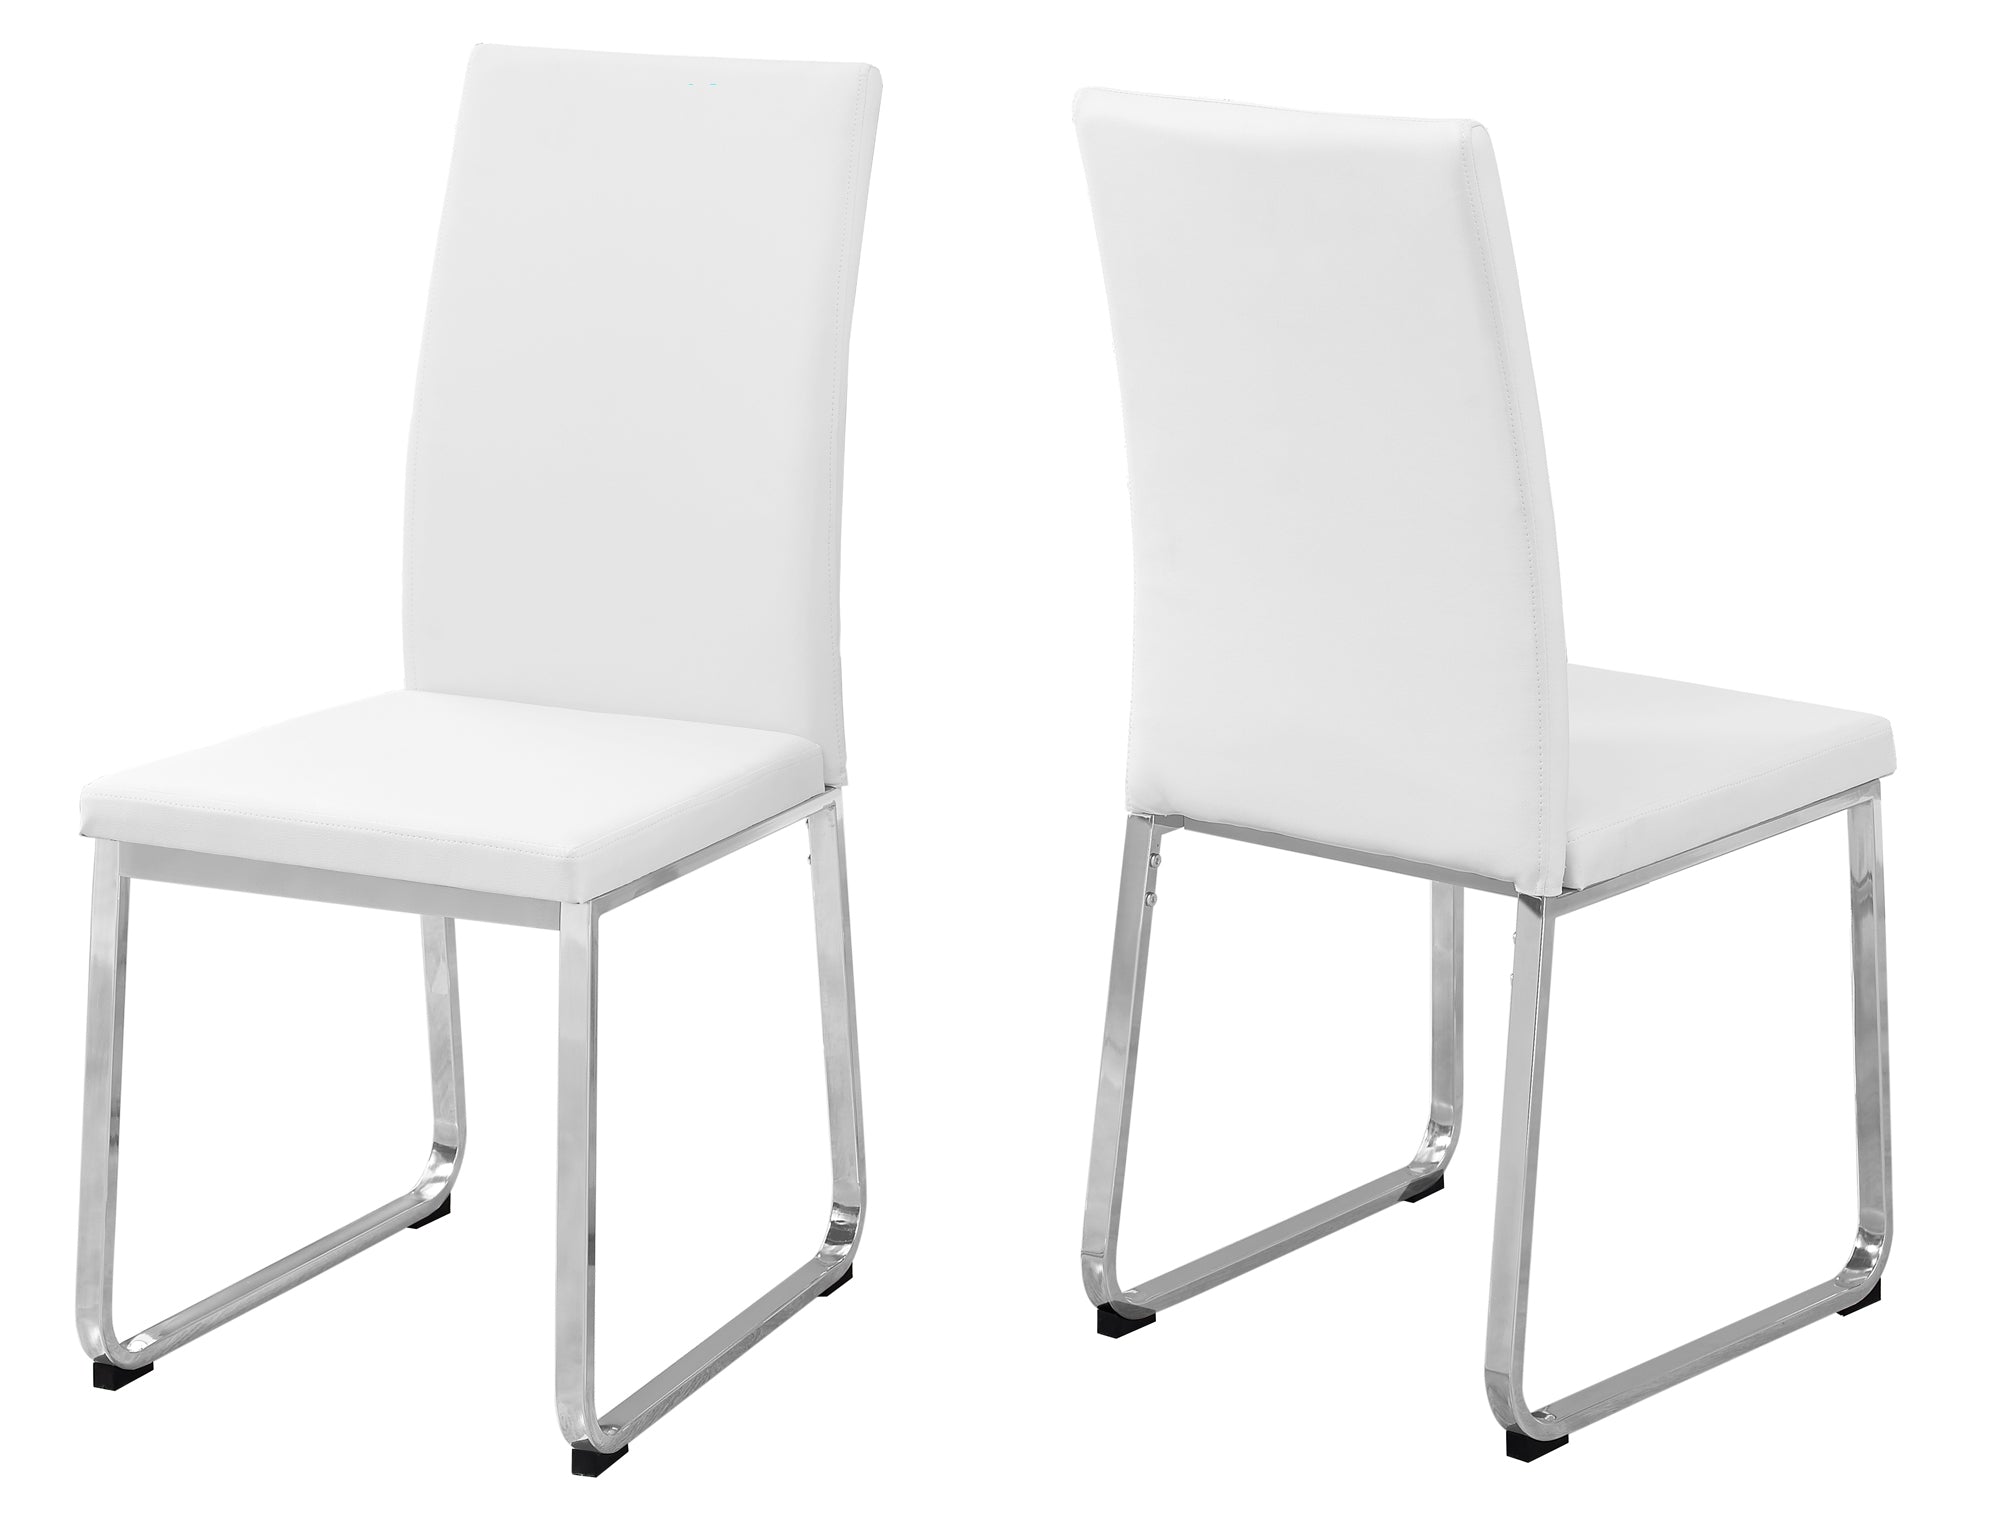 Set Of Two Gray Upholstered Faux Leather Solid Back Dining Chairs